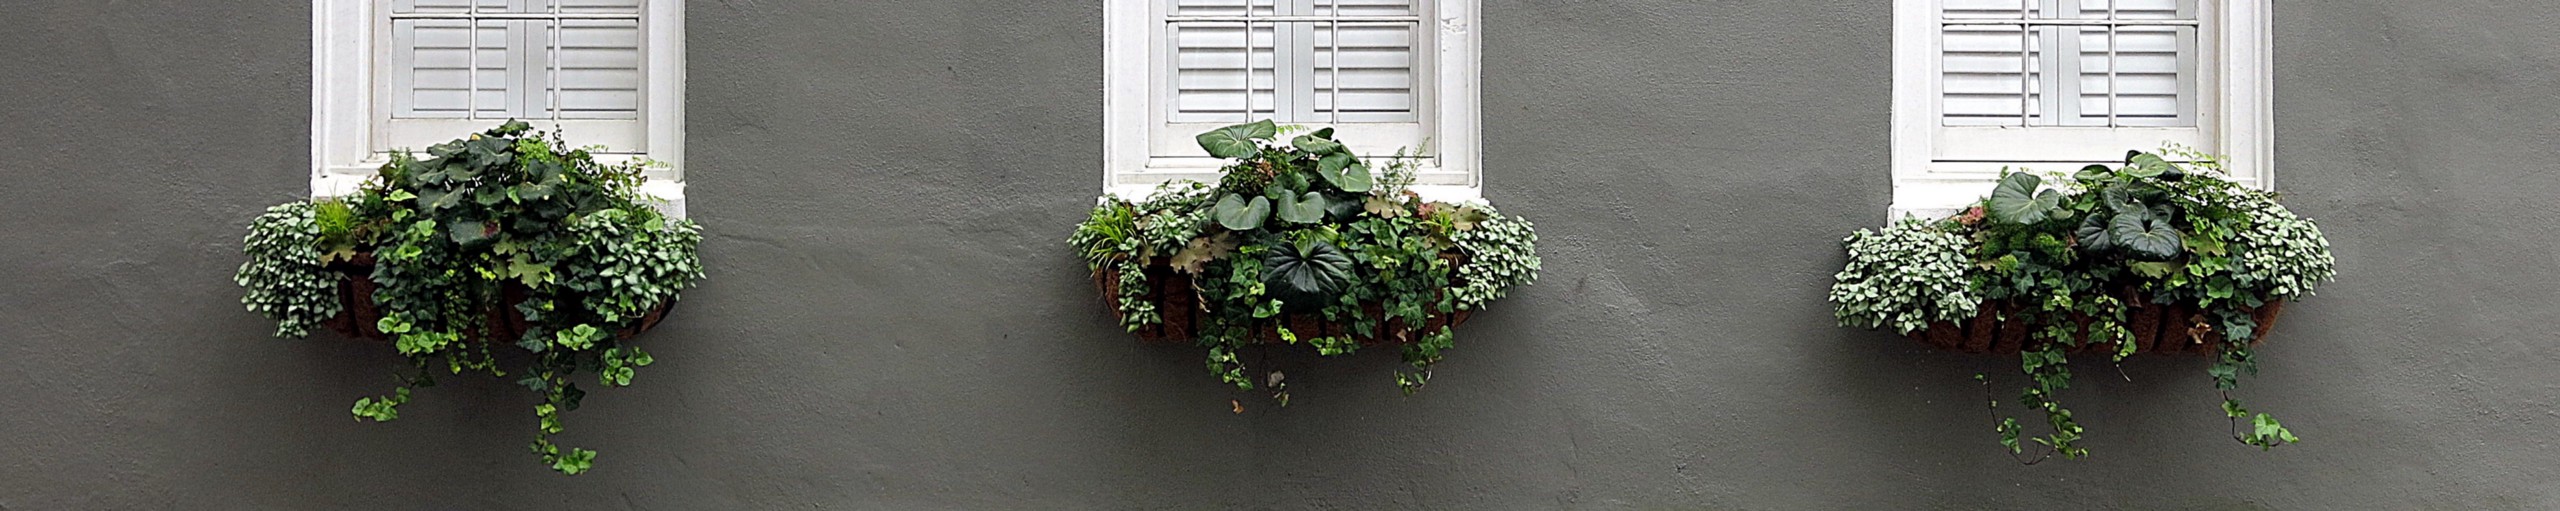 Flowering plants grow in window boxes on a house.